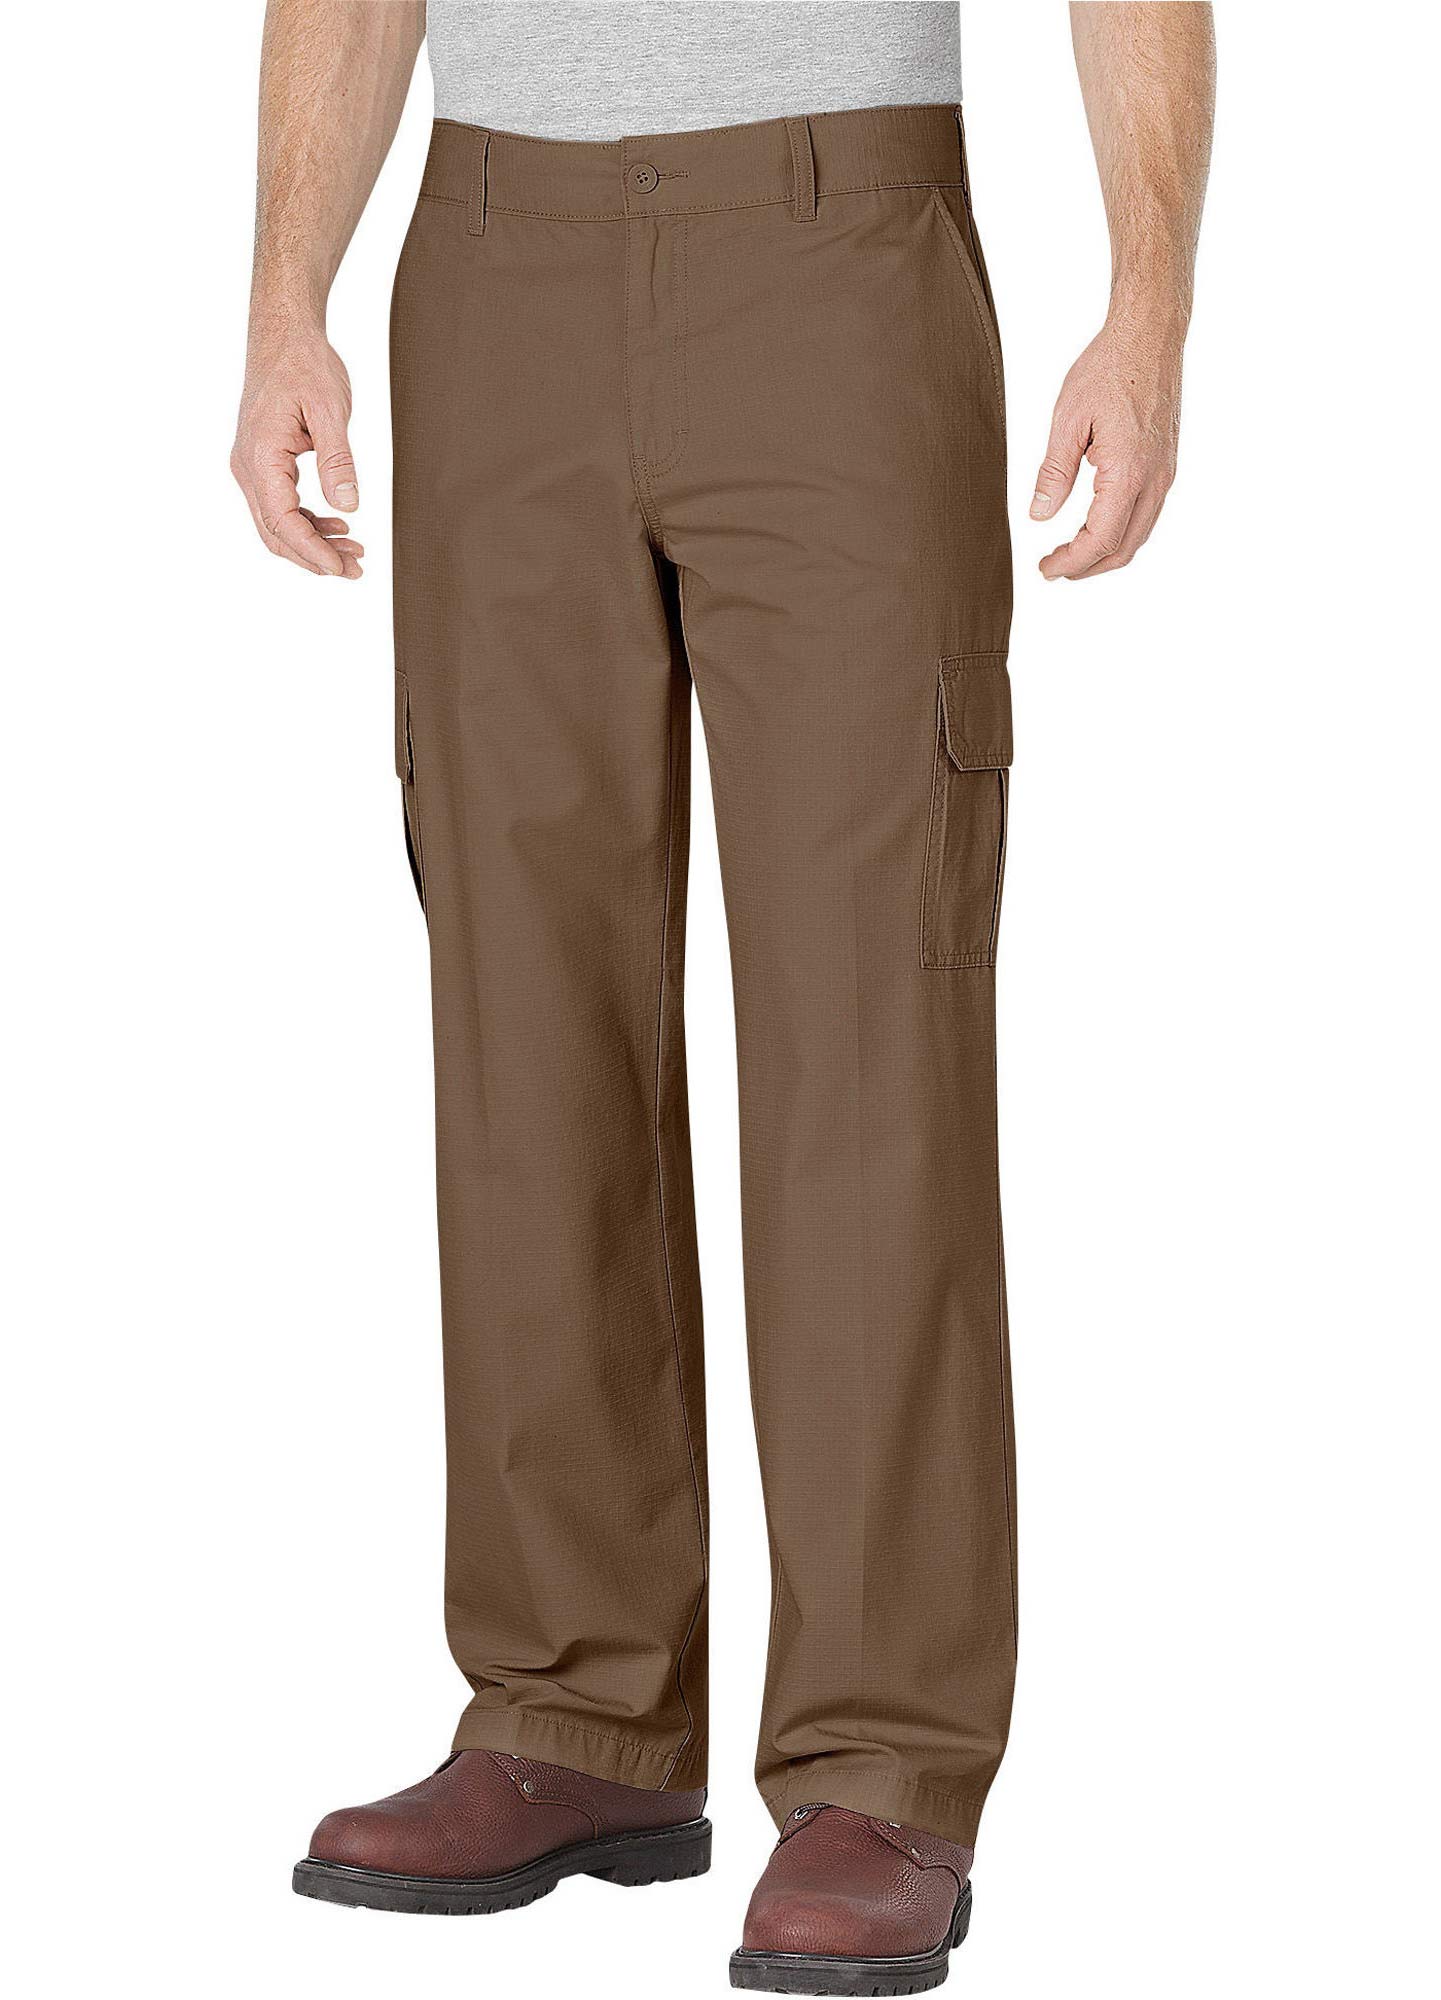 Dickies Relaxed Fit Lightweight Ripstop Cargo Pant - WP351